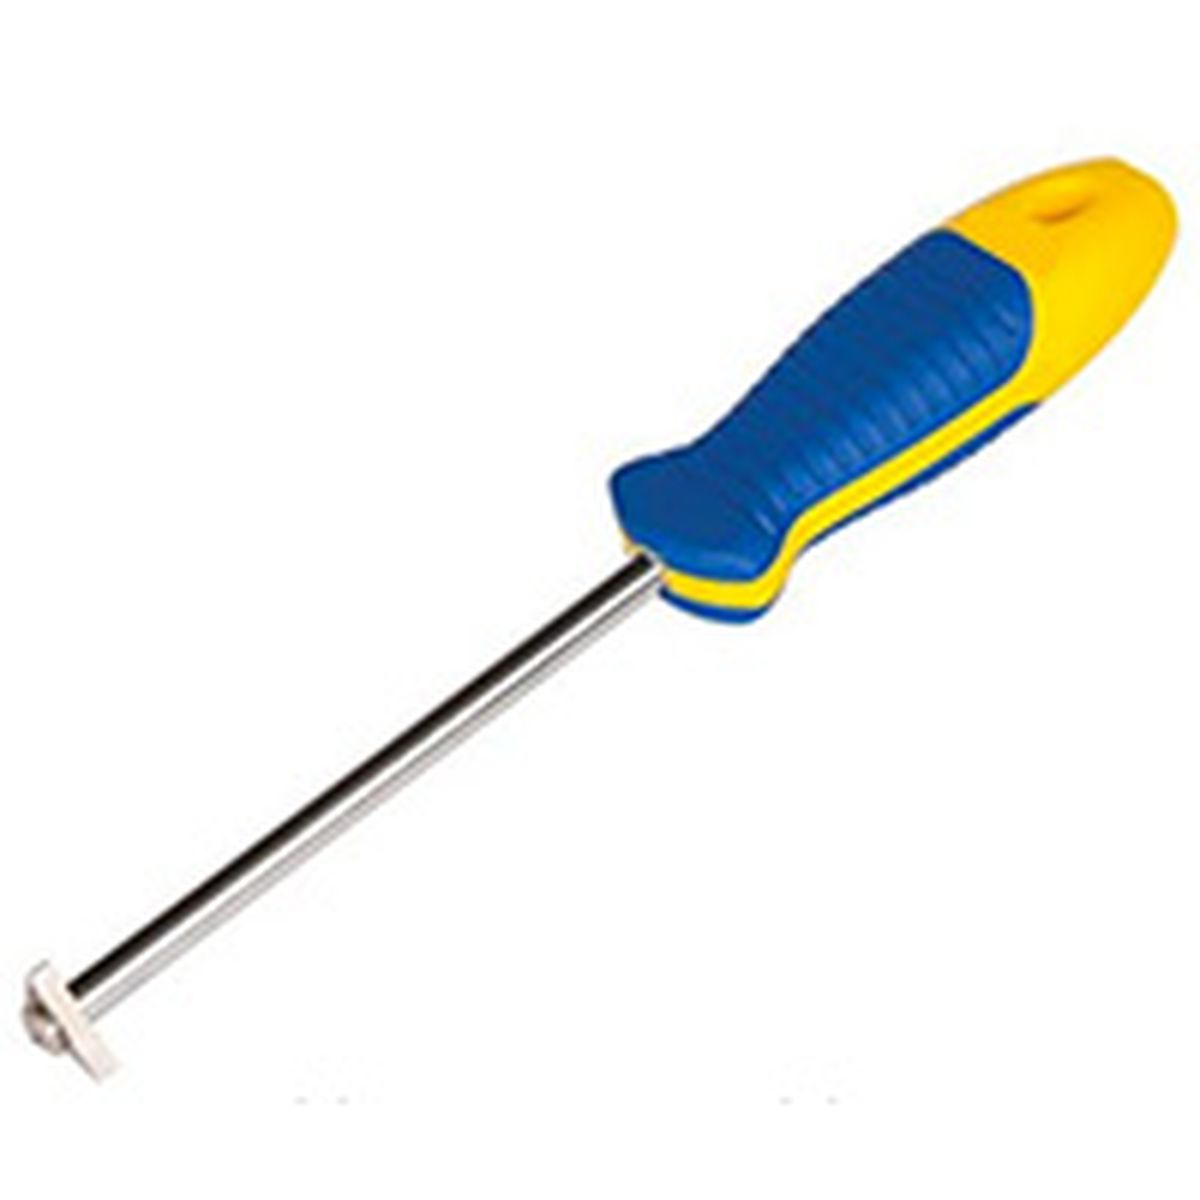 grout removal knife